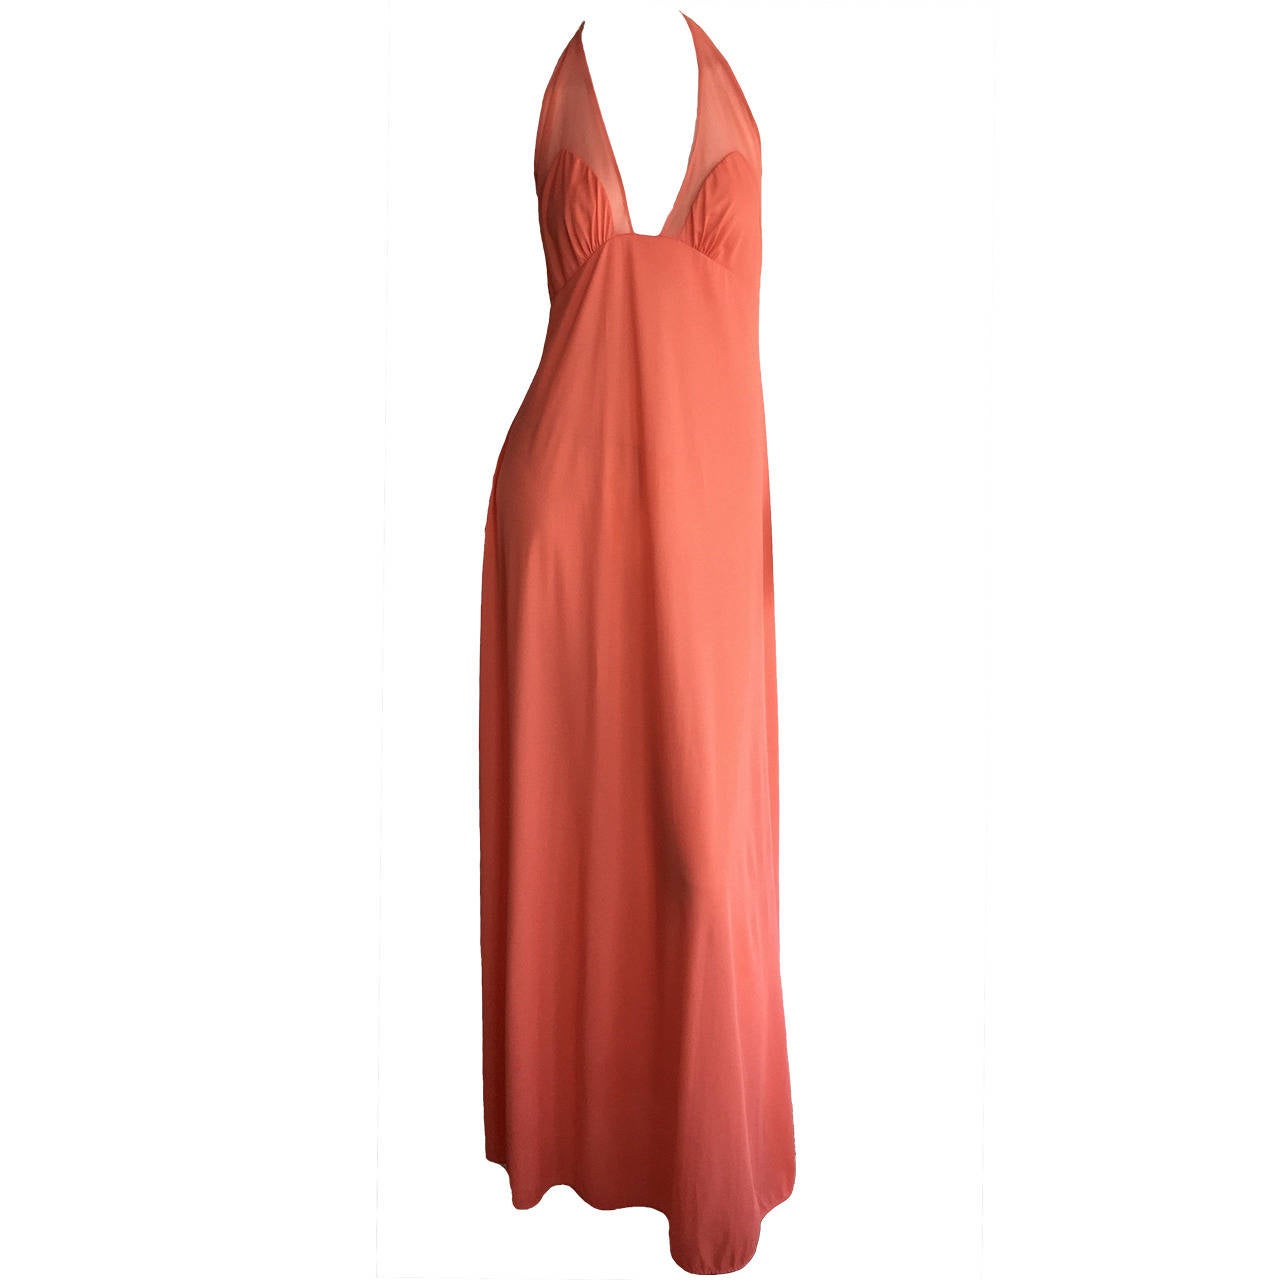 Sexy Vintage Christian Dior Coral Maxi Dress Nightgown Miss Dior at ...